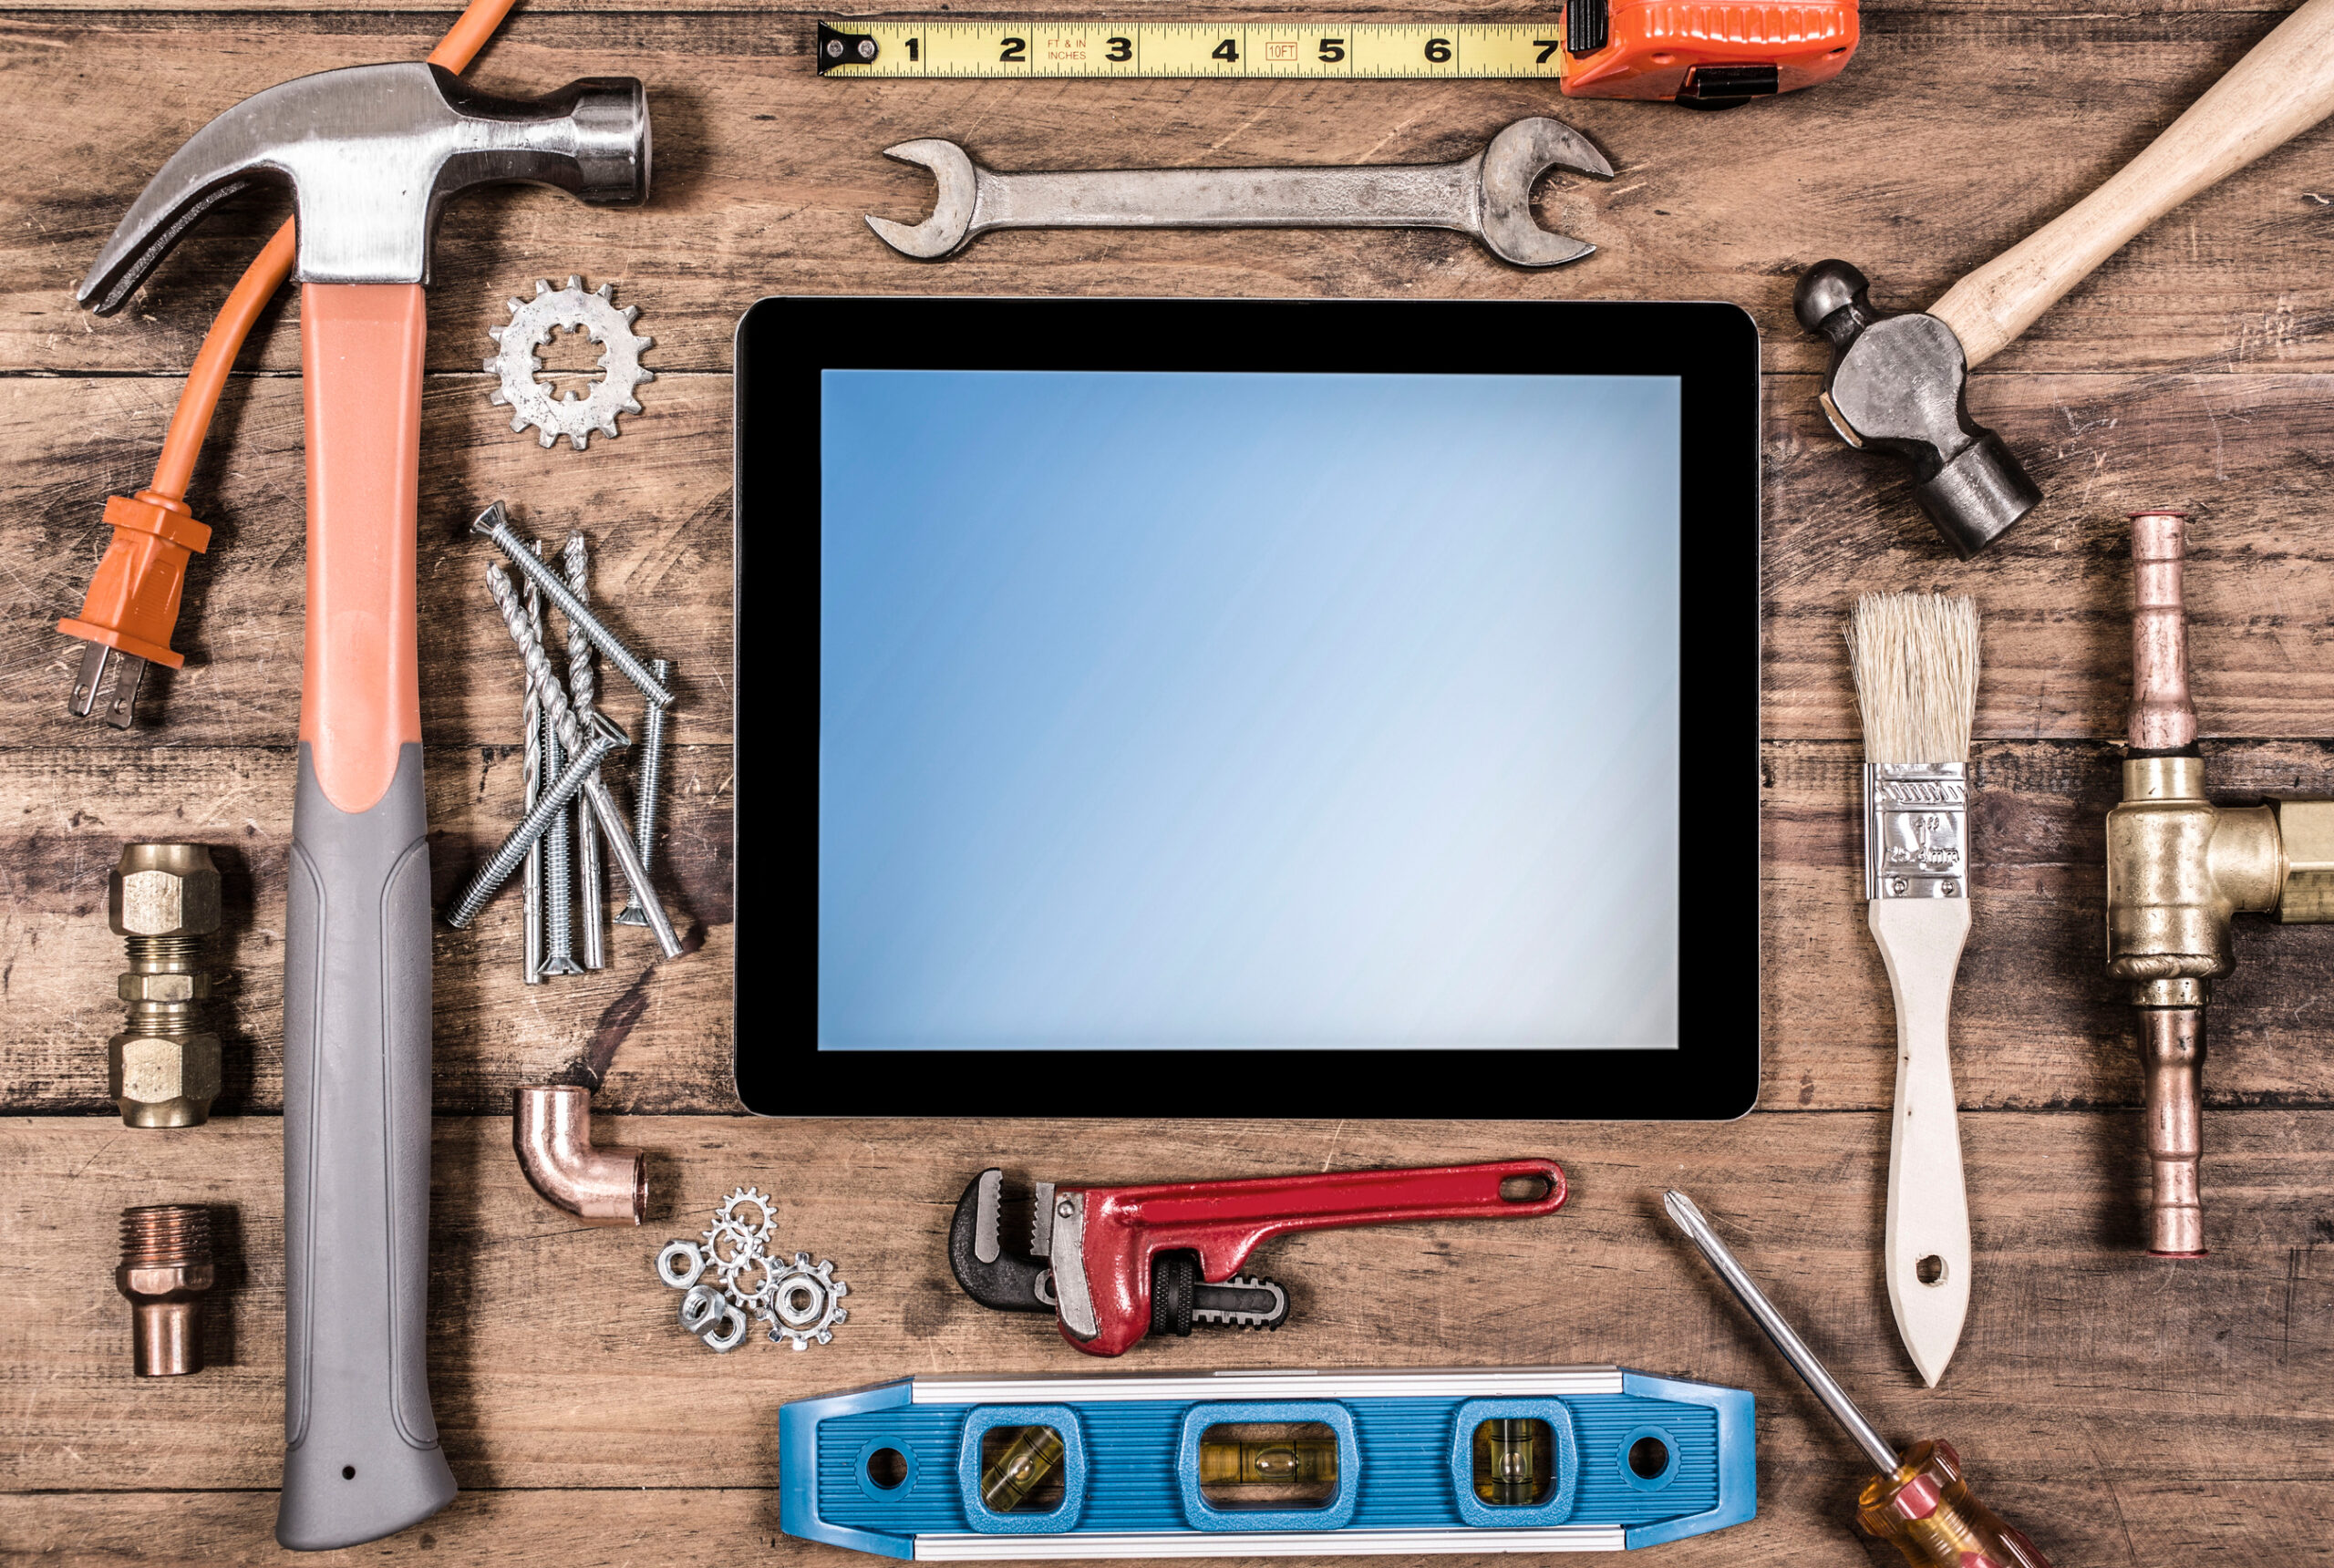 Various construction, DIY hand tools surround a digital tablet.  The screen is blue, blank on the tablet.  Tools include: hammer, nails, level, tape measure, paint brush, wrench, screwdriver.  All items lie on top of a rustic wooden table or desk.  Home improvement, construction themes.  Great background.